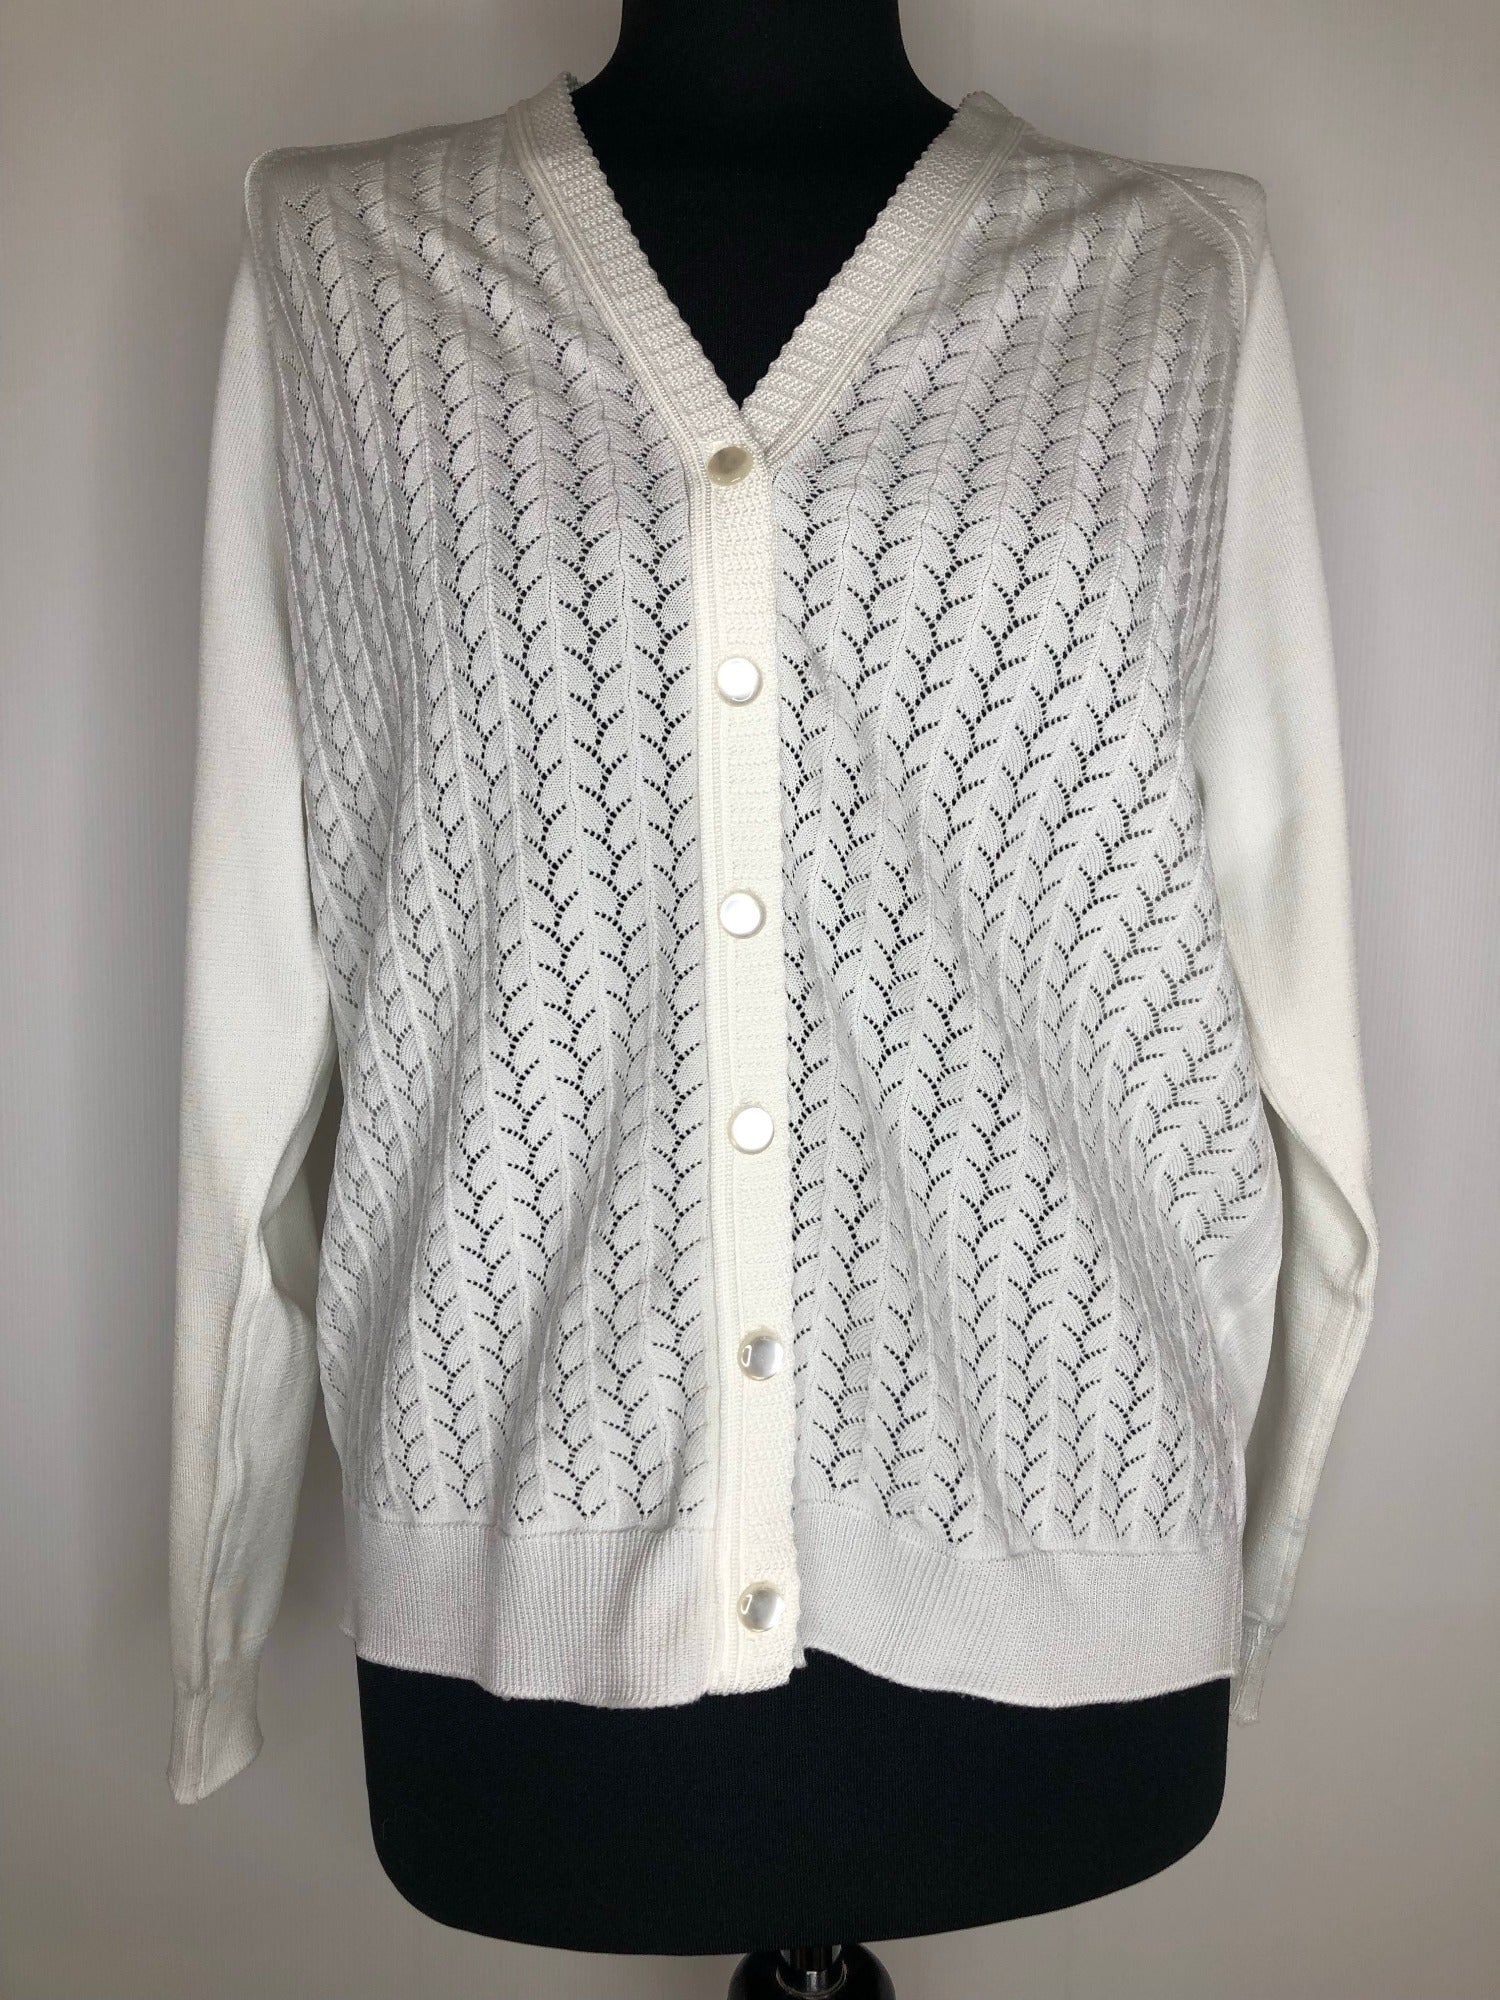 womens  white  vintage  Urban Village Vintage  top  sweater  MOD  Lightweight Knit  light knit  knitwear  knitted  knit  cropped  cardigan  cardi  60s  1960s  16